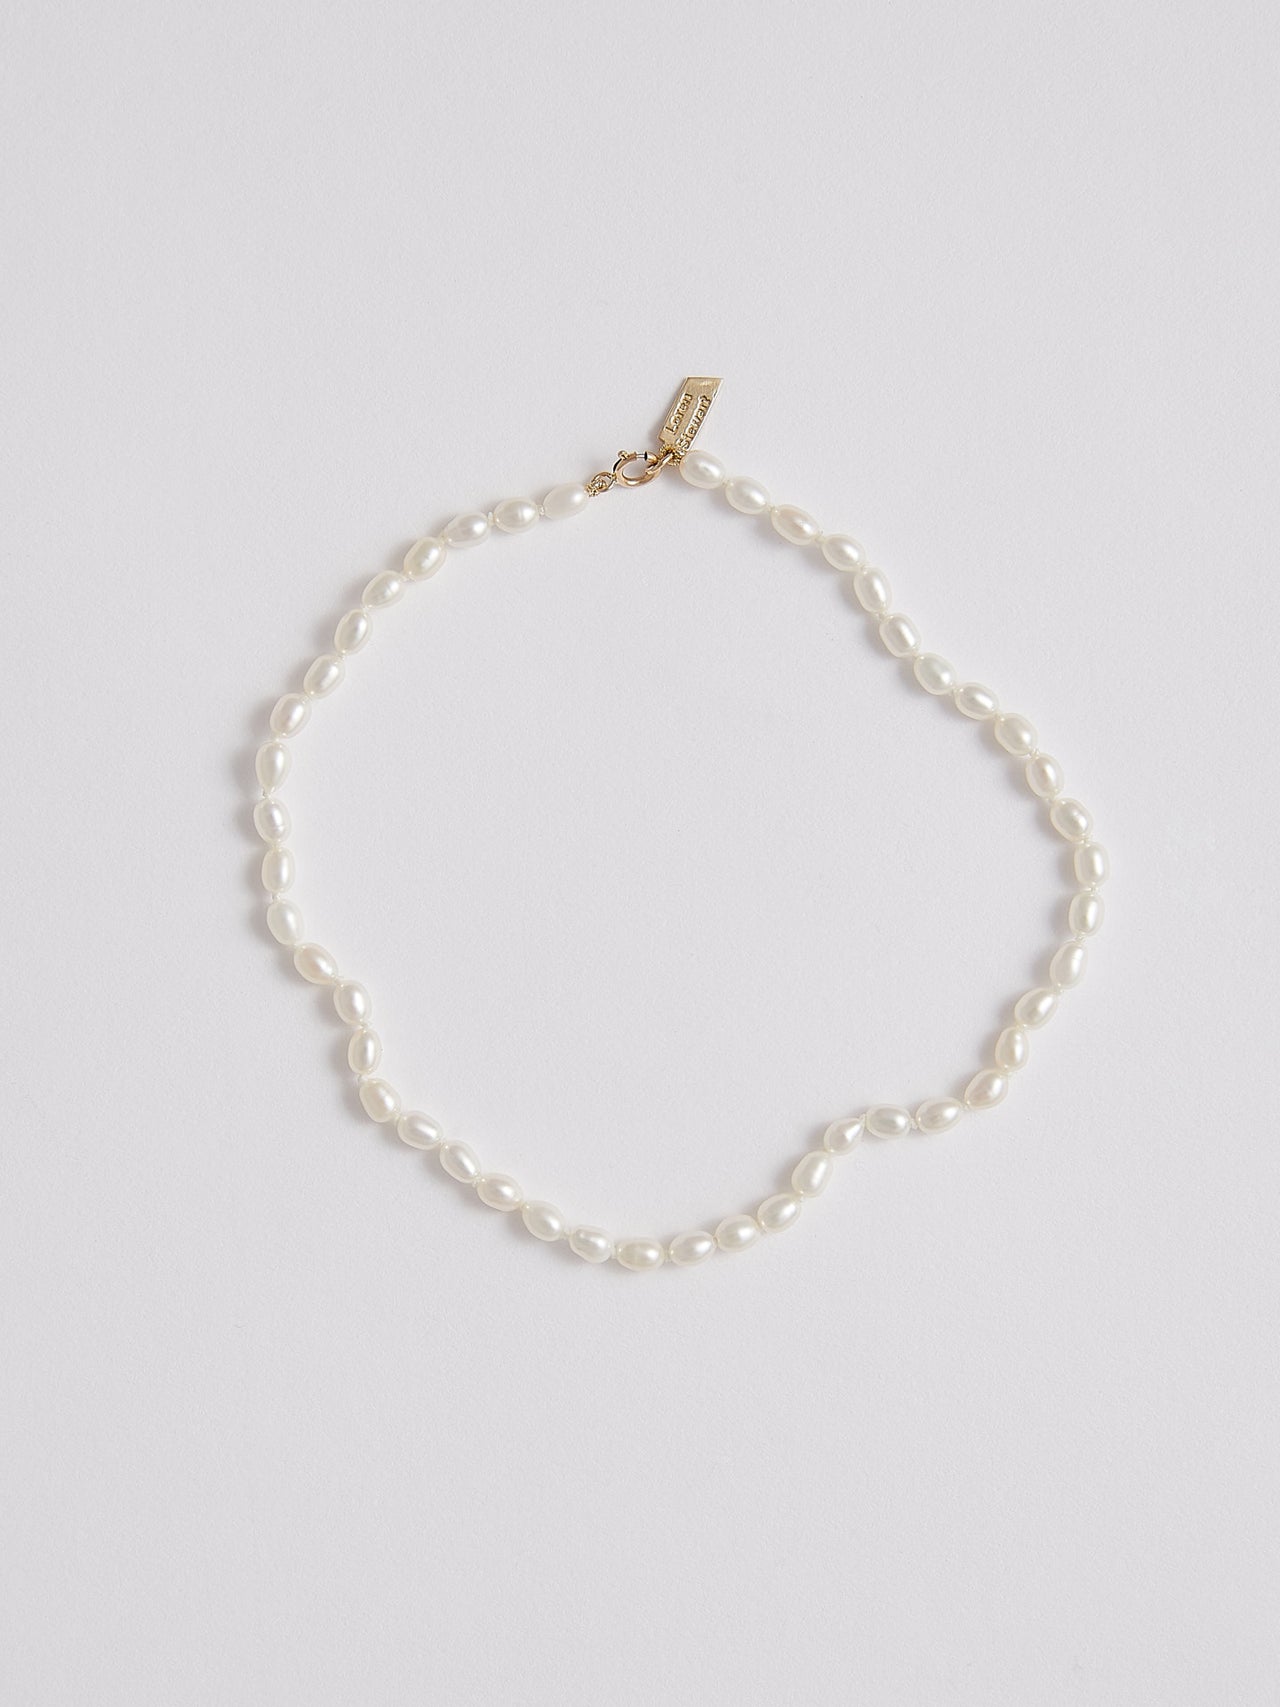 White Freshwater Rice Pearl Anklet pictured on light grey background. 